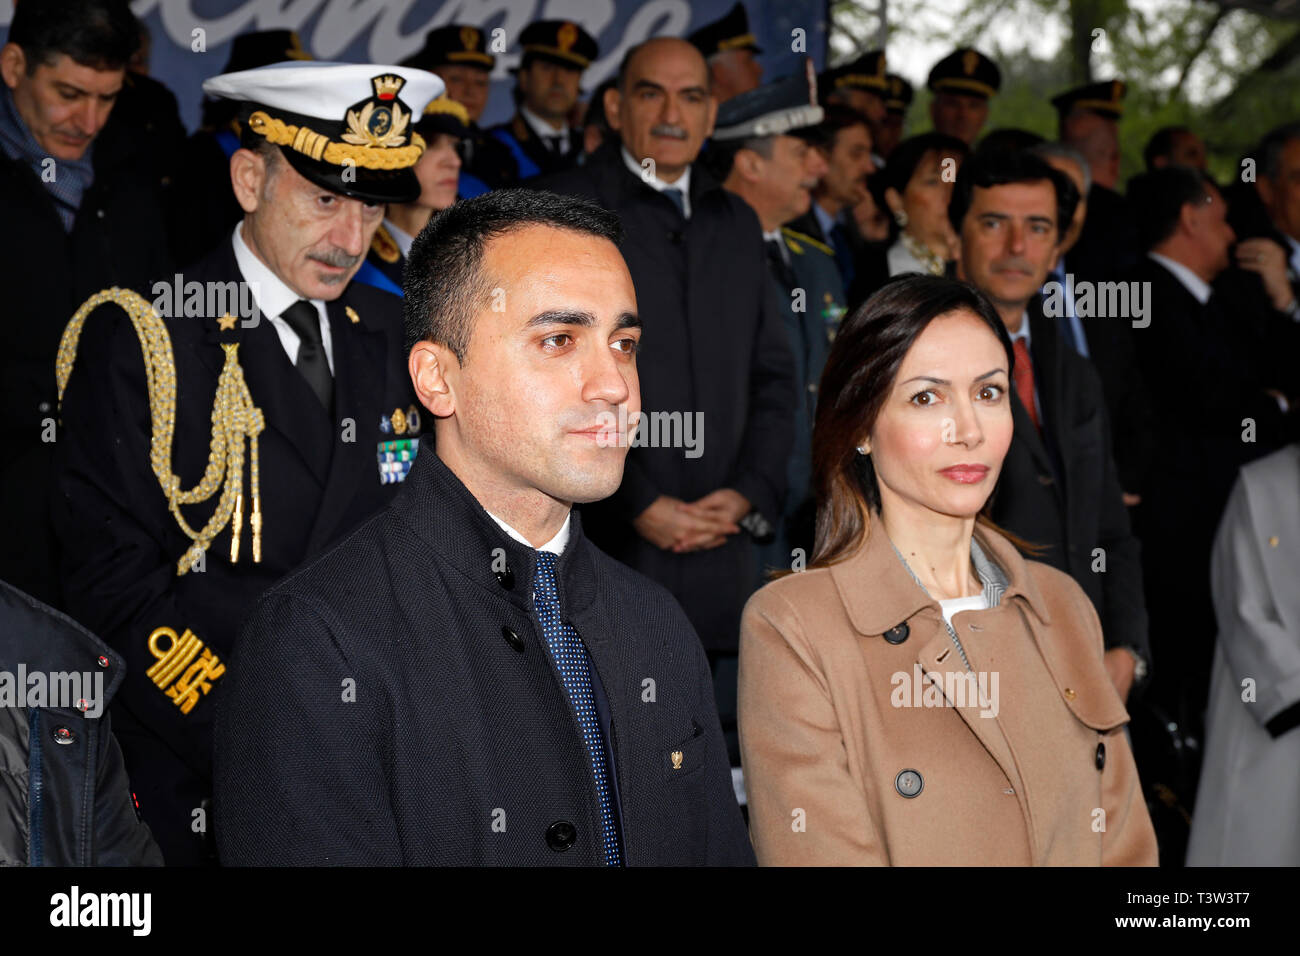 Rome, Italy - April 10, 2019: Deputy Prime Minister Luigi Di Maio and Mara Carfagna, on stage during the celebrations of the 167th anniversary of the  Stock Photo